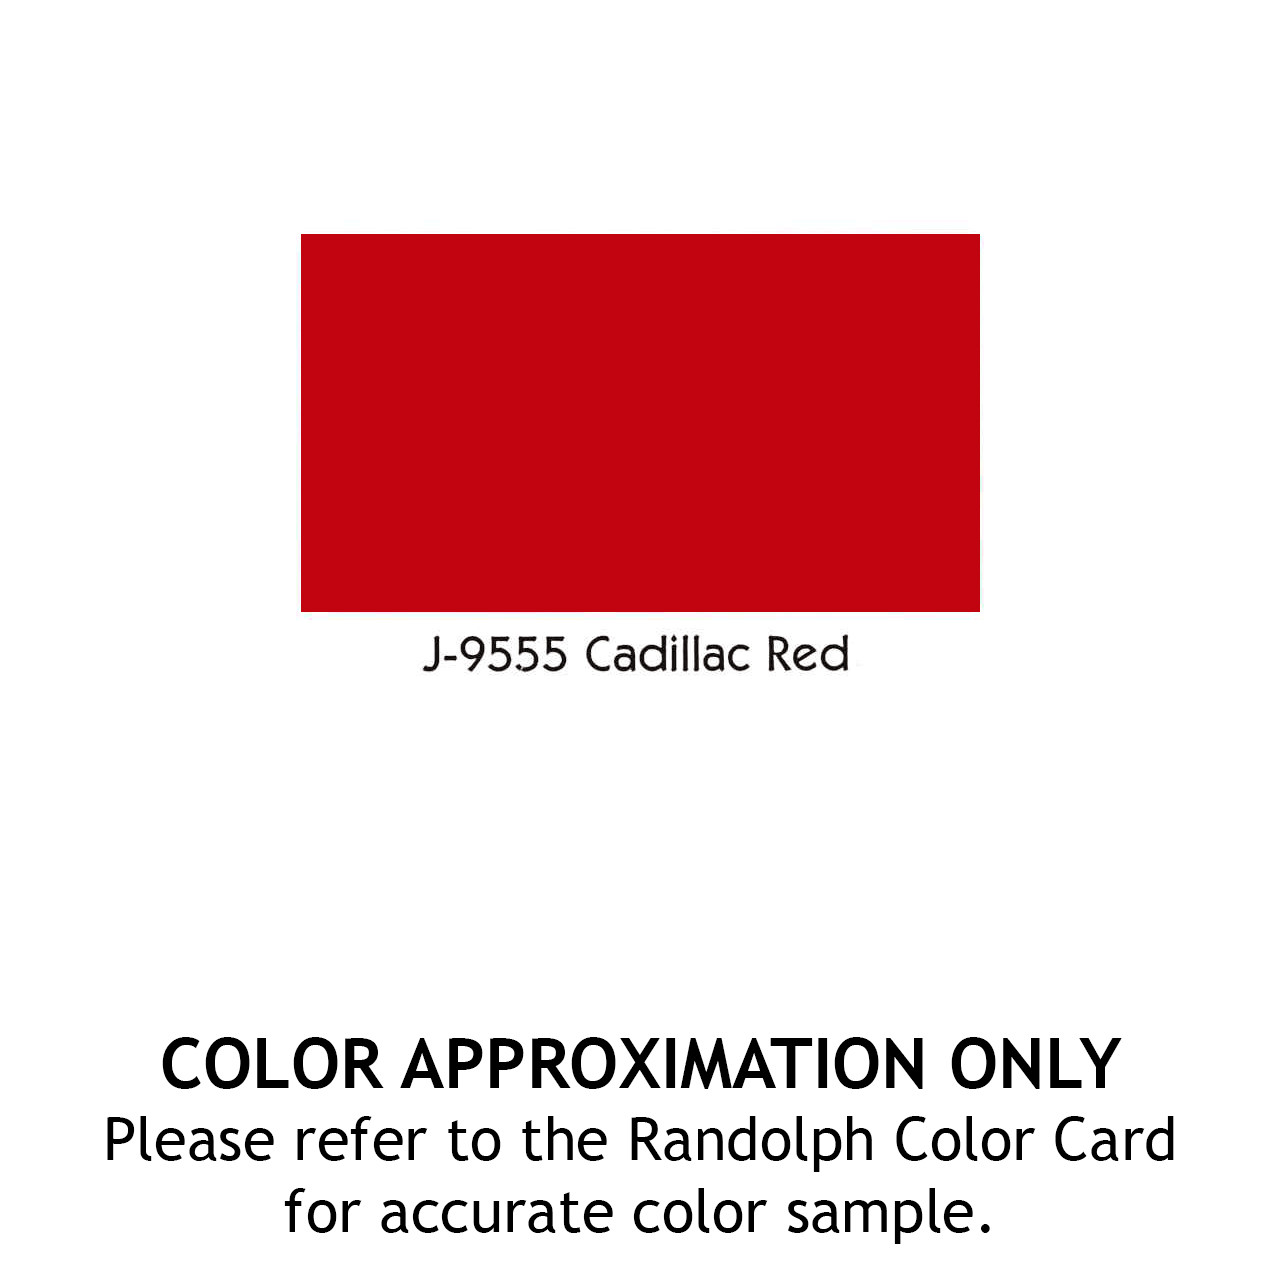 RANDOLPH COLORED BUTYRATE DOPE - CADILLAC RED